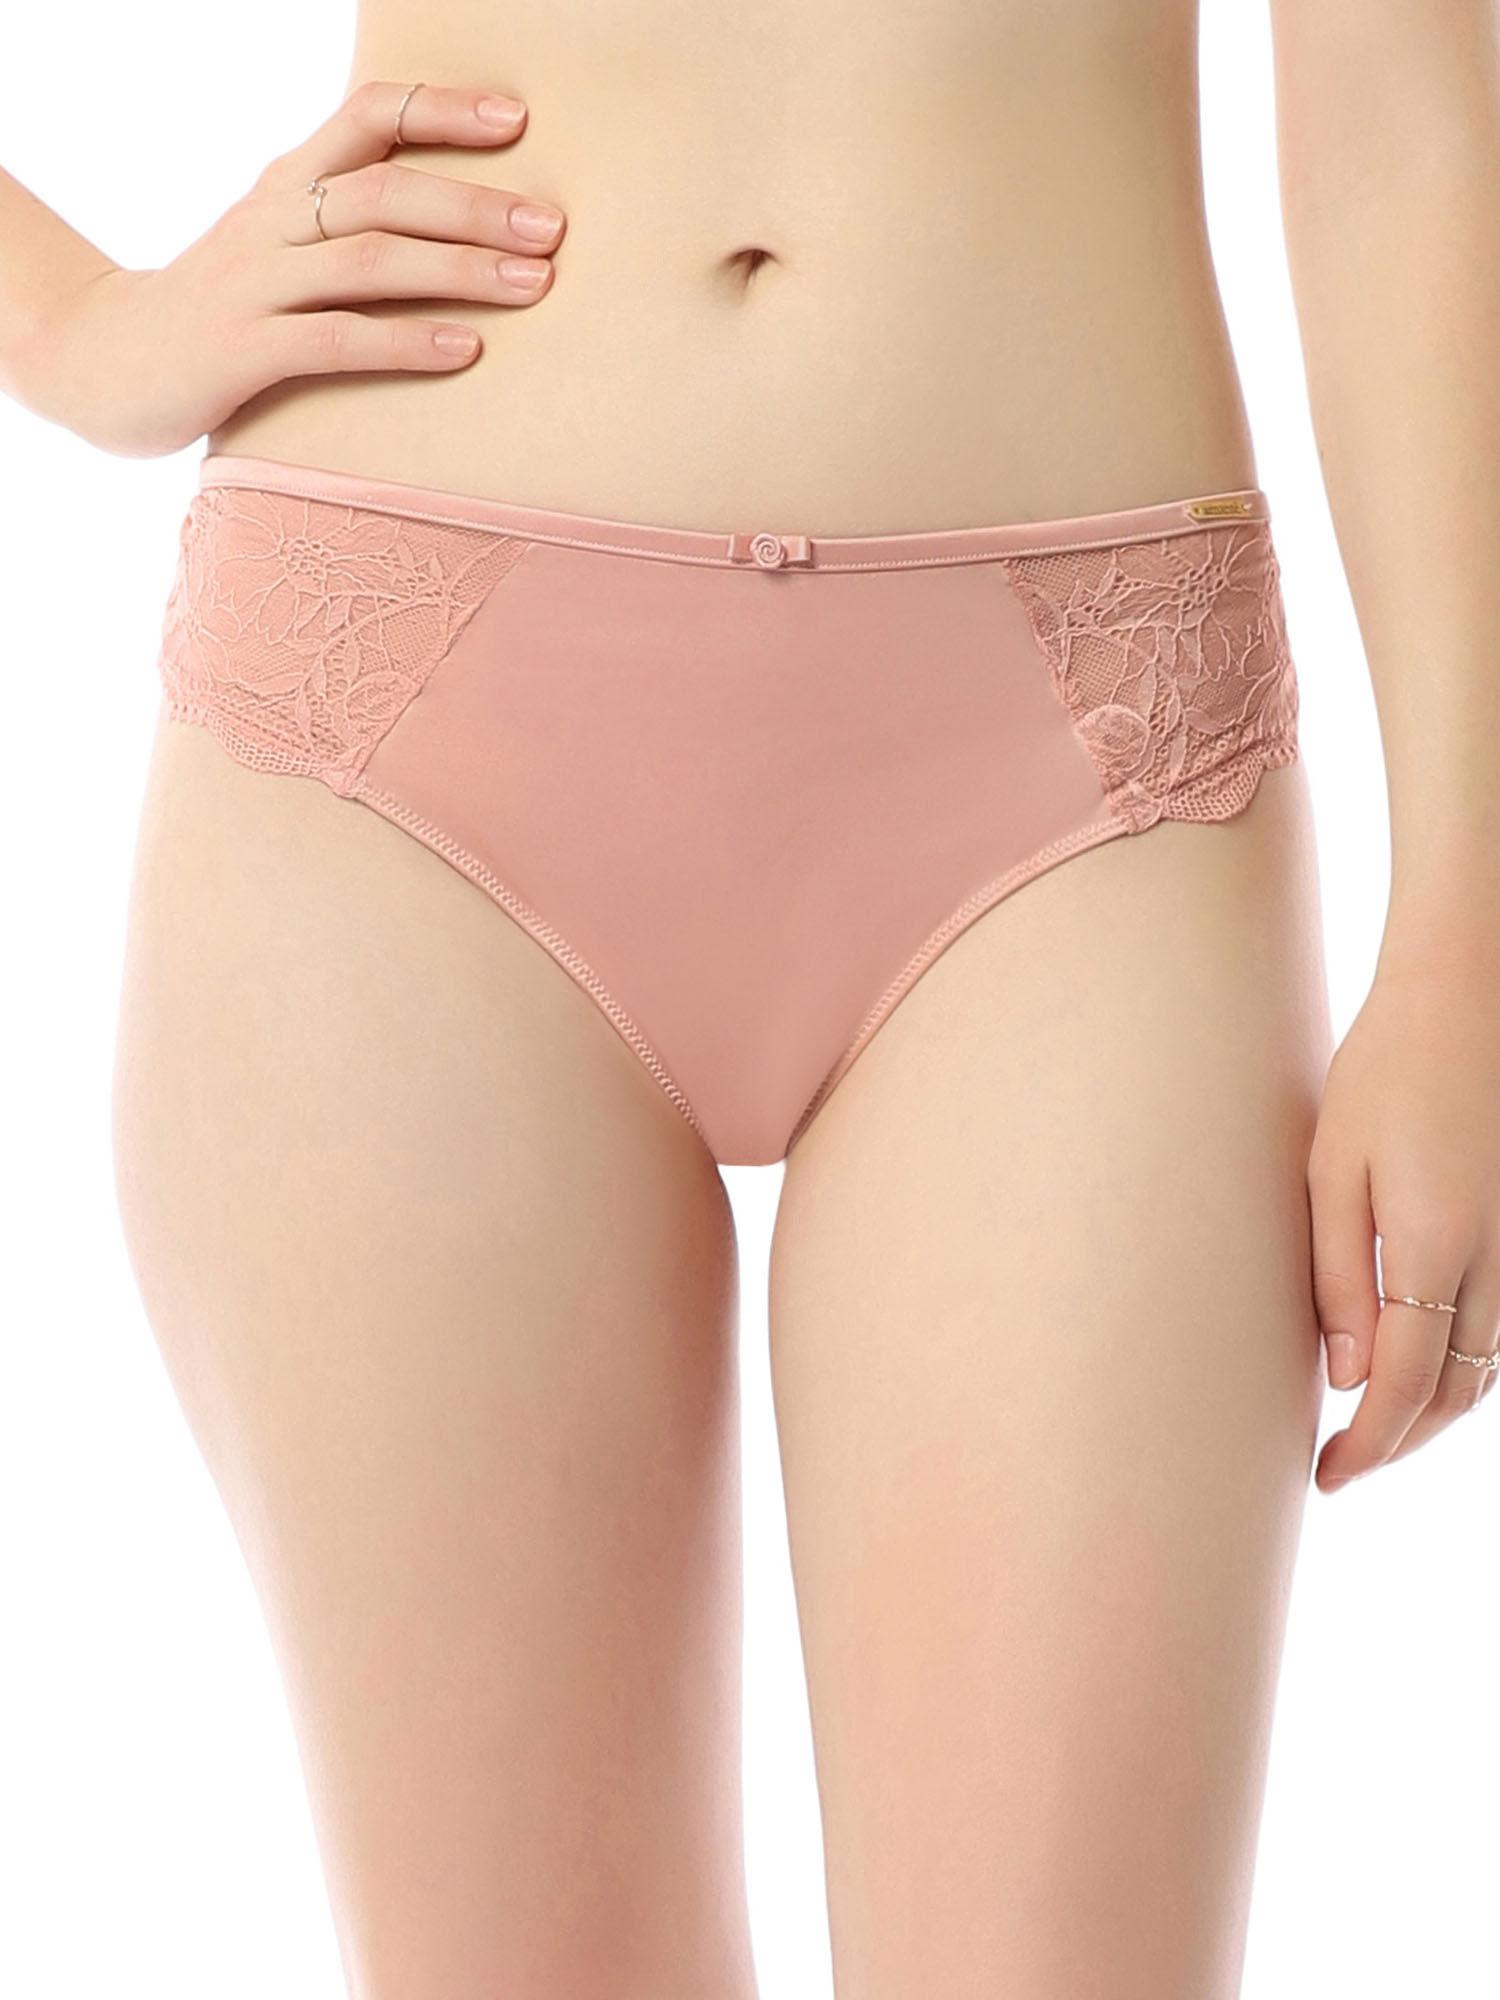 lace-three-fourth-coverage-low-rise-eternal-bliss-brazilian-panty